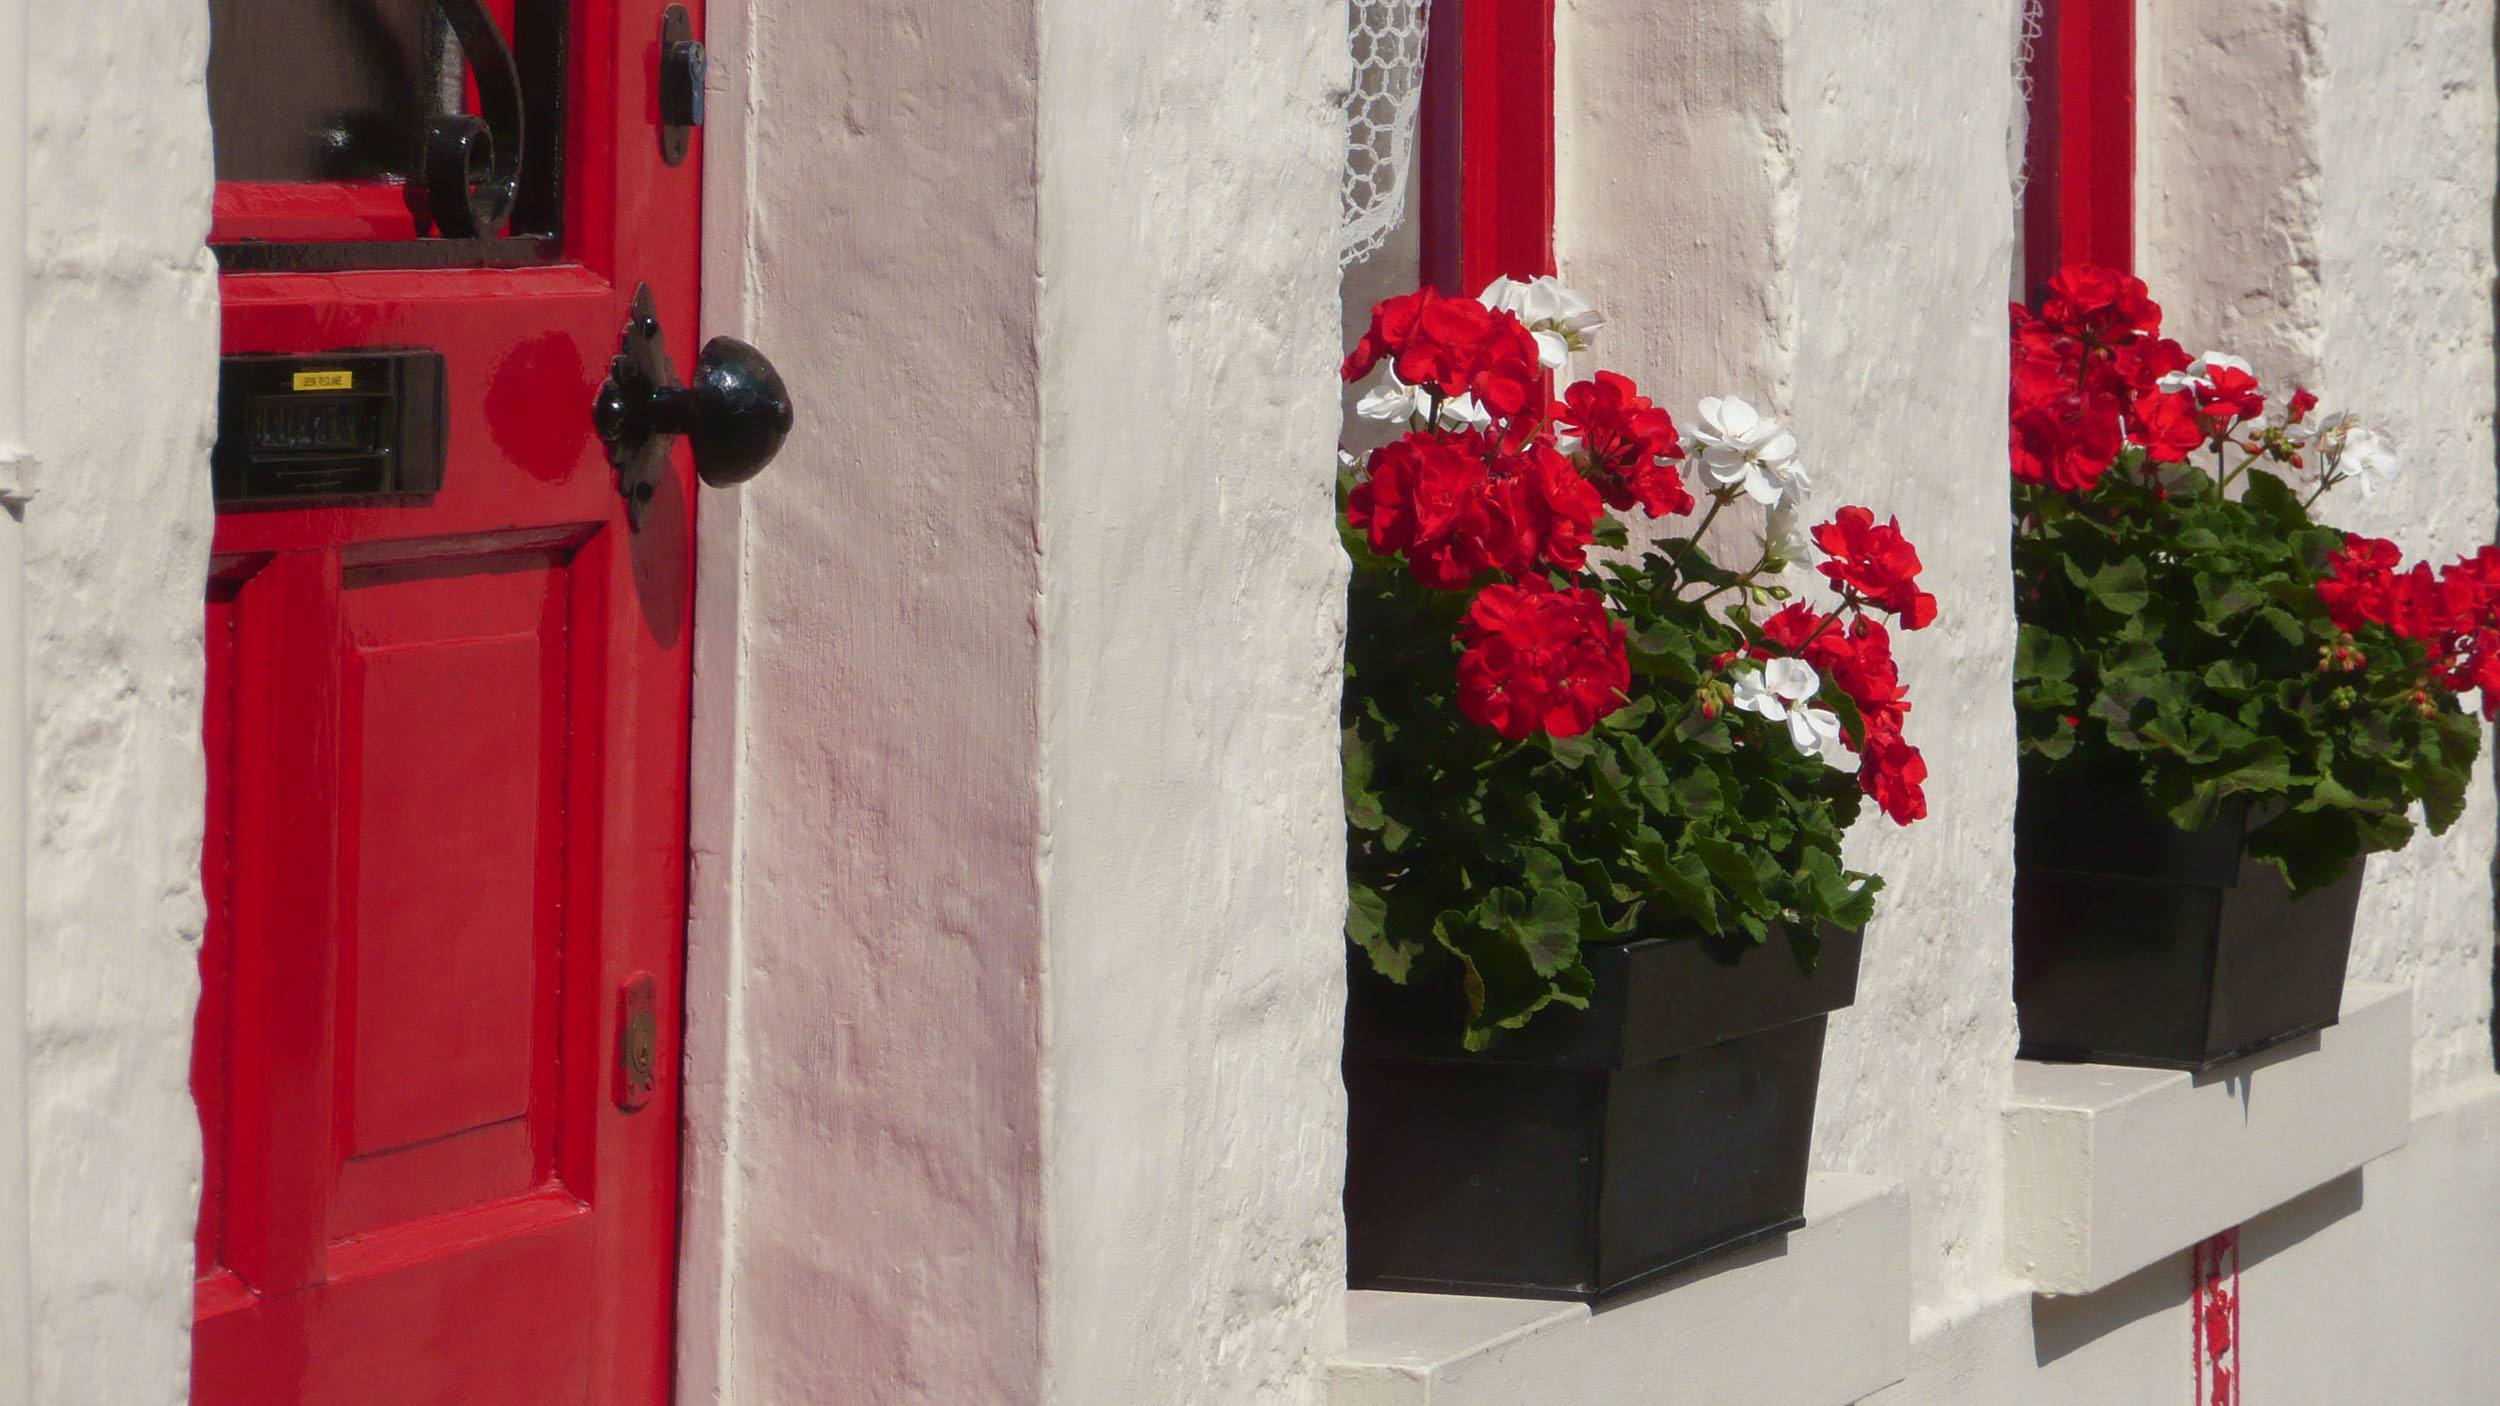 Window boxes overflowing with red and white geraniums in Bruges Belgium